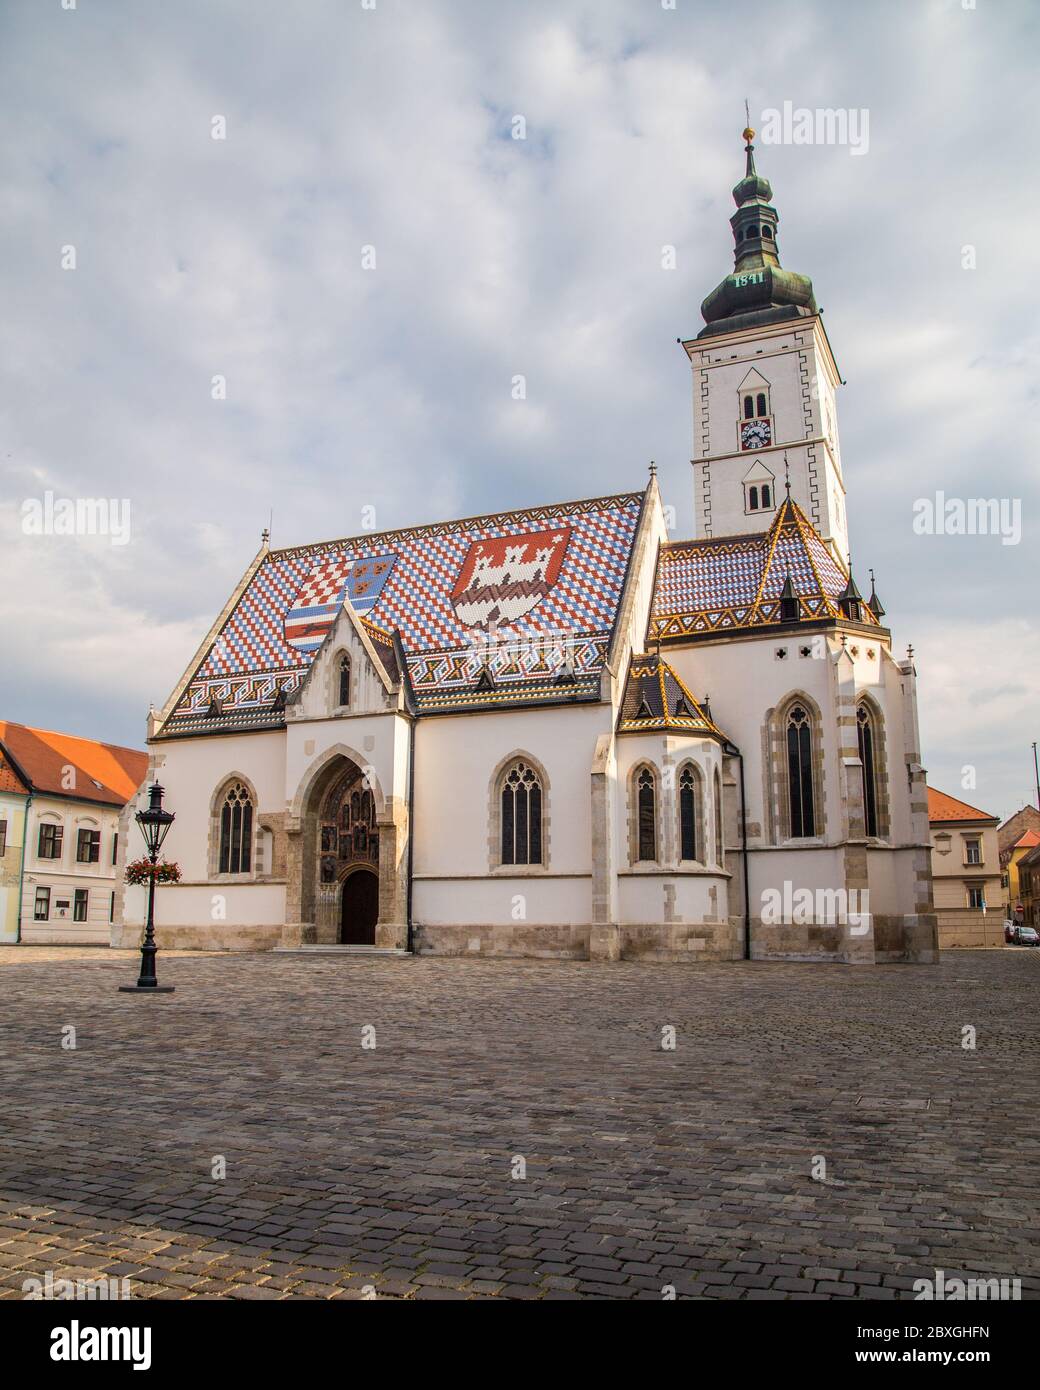 ZAGREB, CROATIA - 17TH AUGUST 2016: The outside of St Marks Church in central Zagreb, Croatia during the day. A person can be seen. Stock Photo